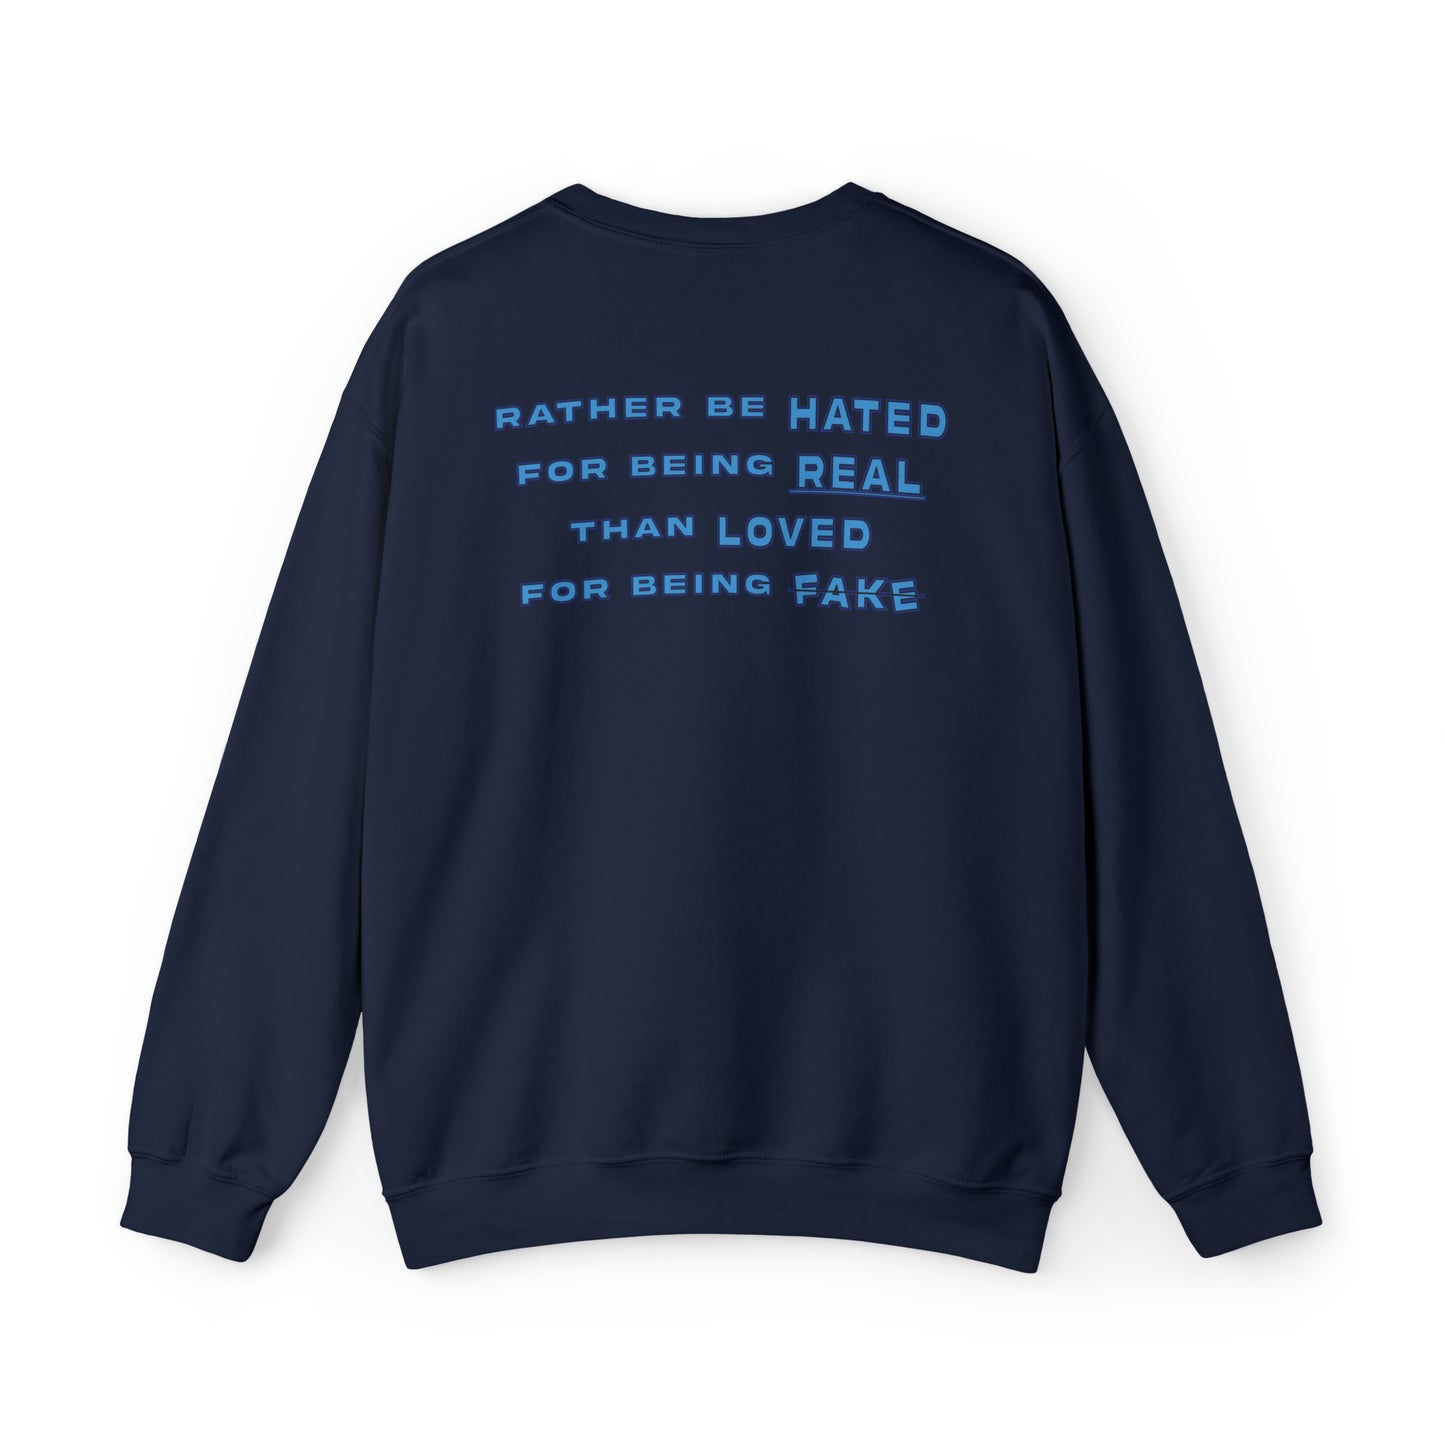 Isaiah Williams: Rather Be Hated For Being Real Than Loved For Being Fake Crewneck